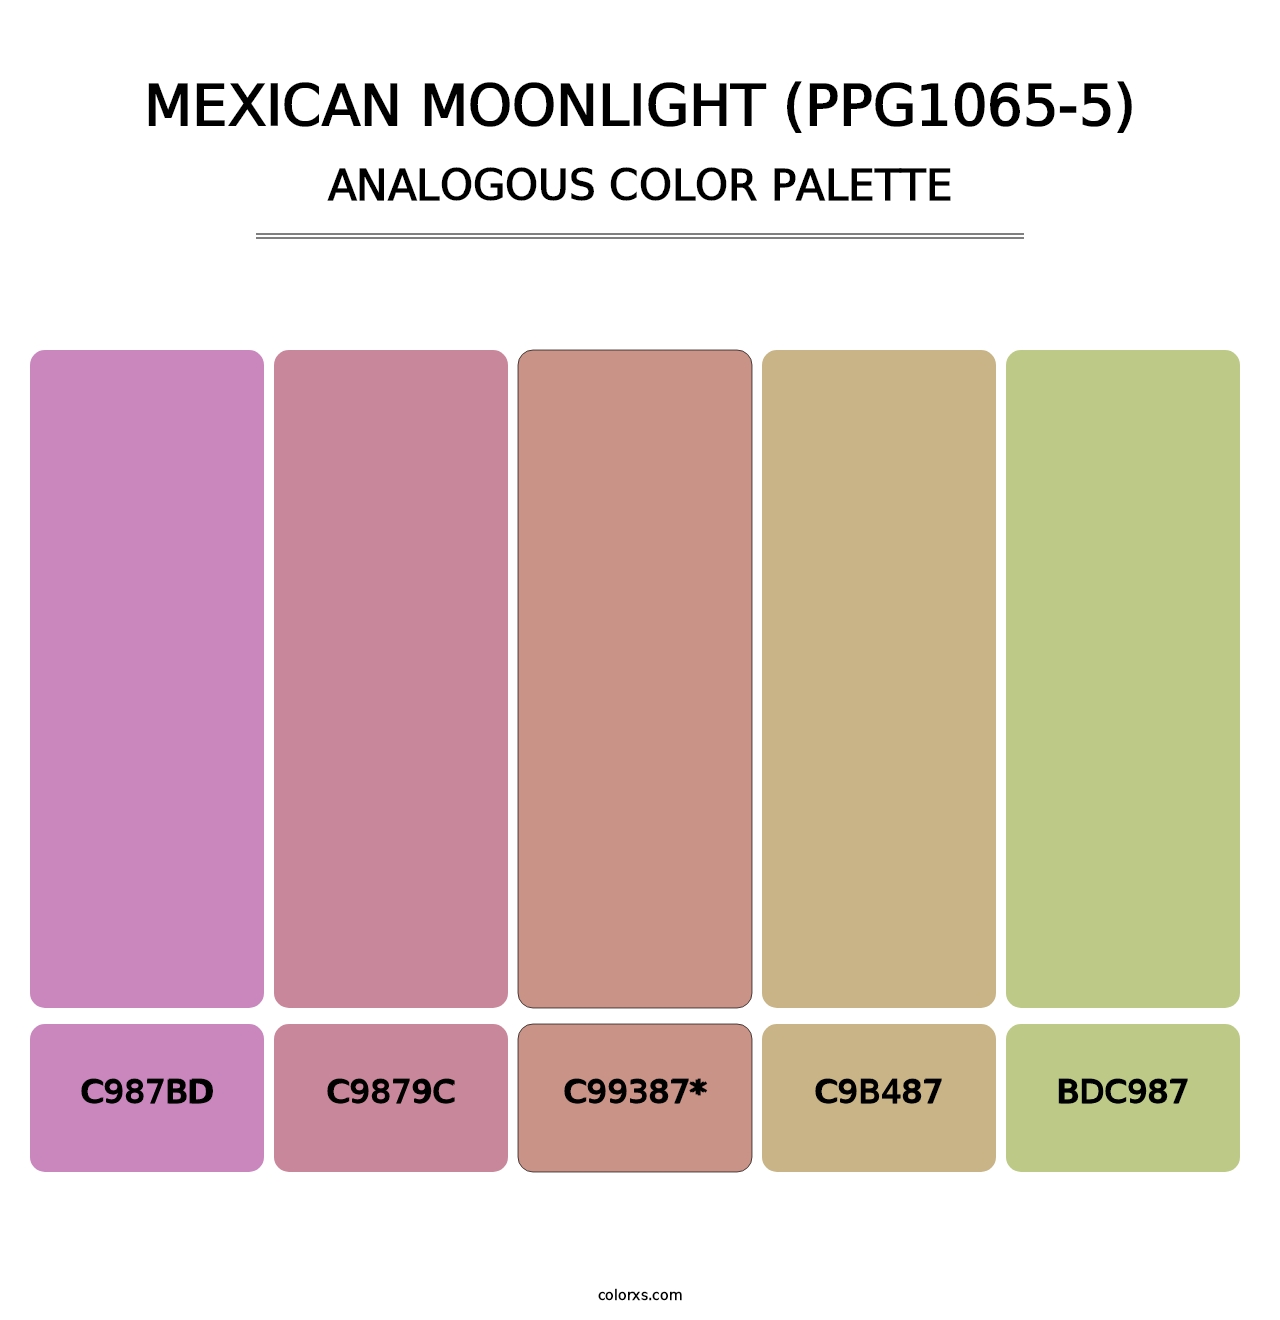 Mexican Moonlight (PPG1065-5) - Analogous Color Palette